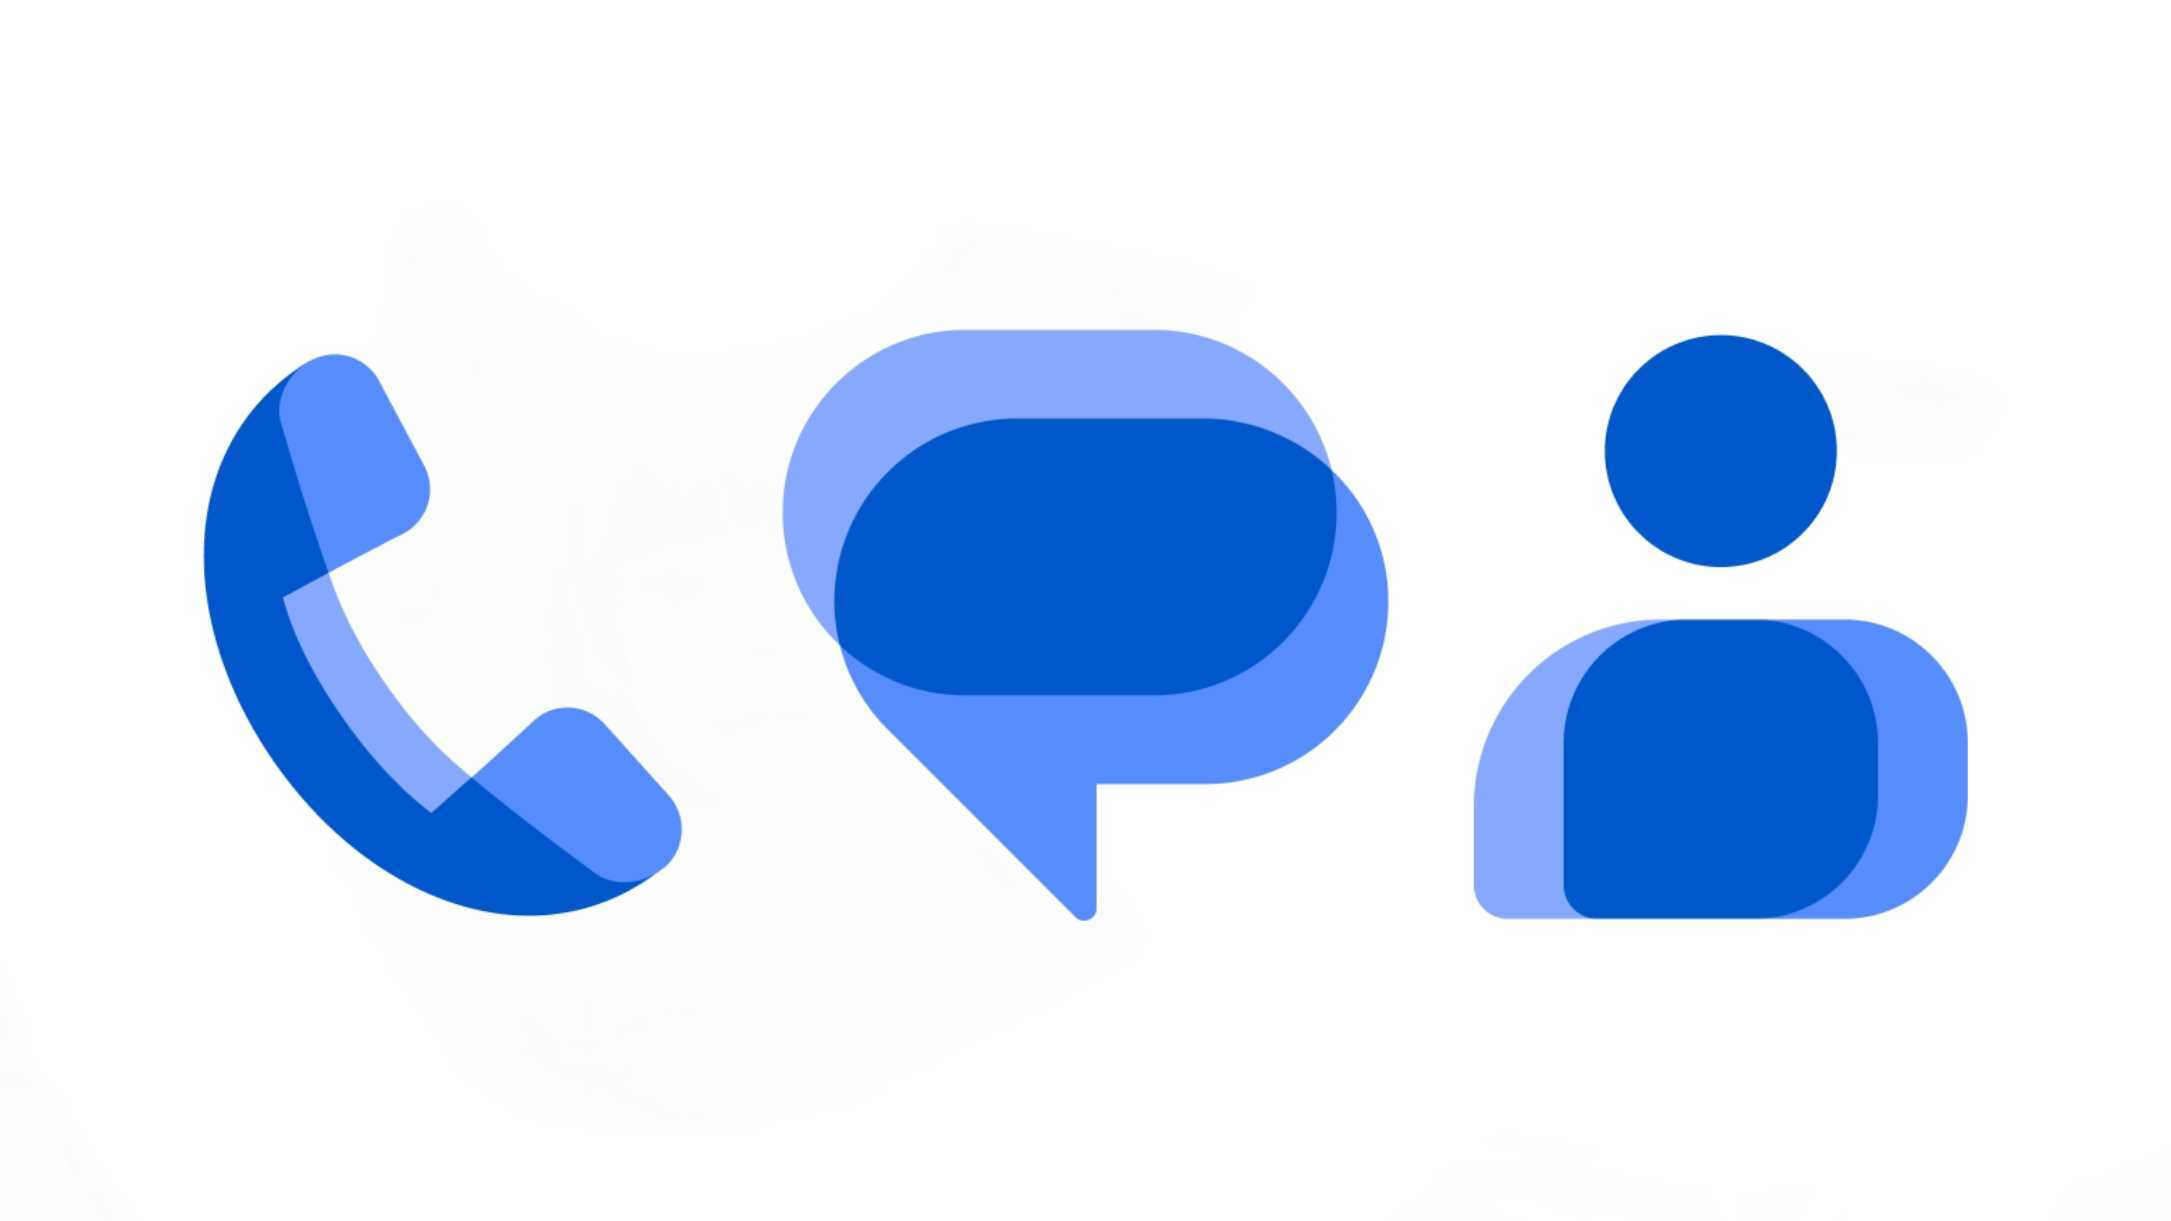 Google's new app icons for Messages, Phone, and Contacts